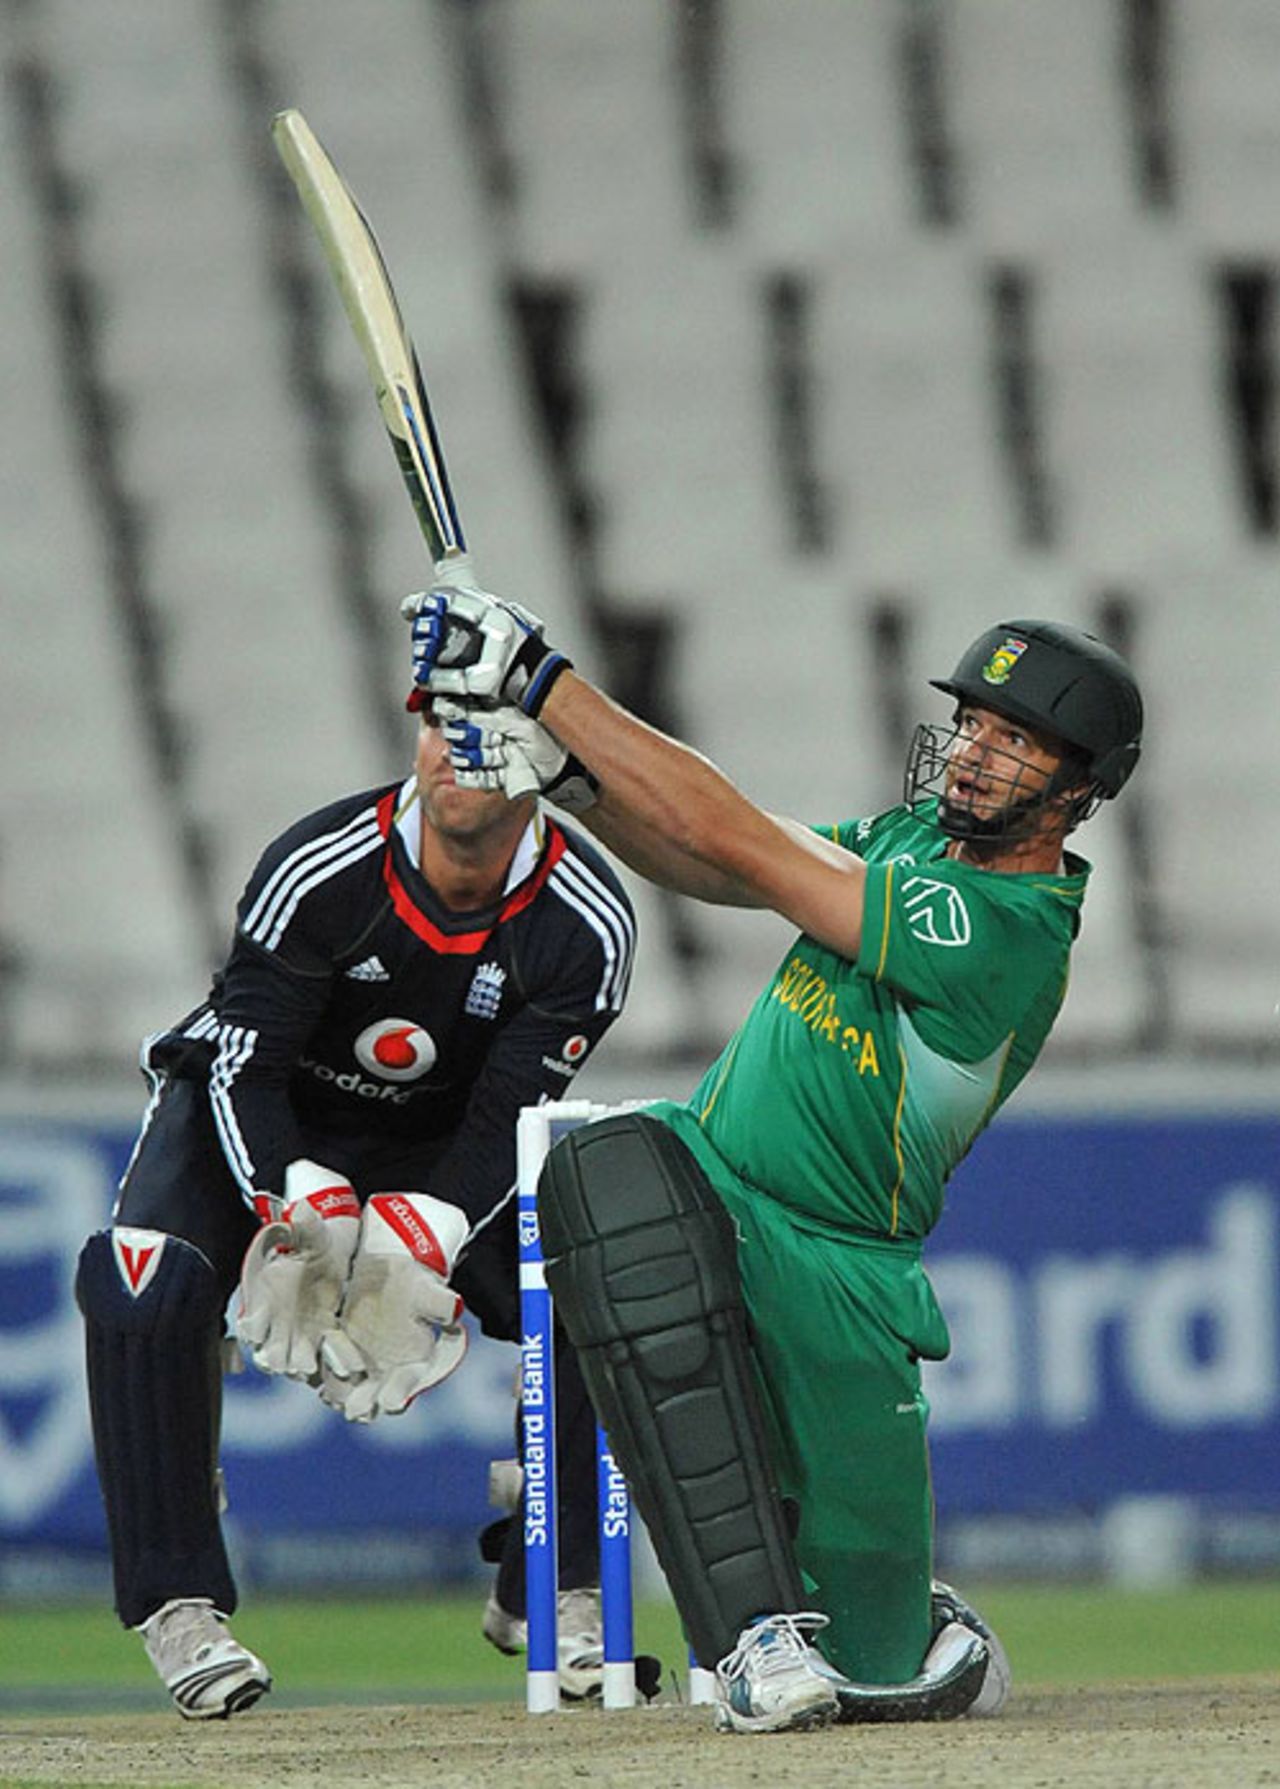 Albie Morkel's six over midwicket off Graeme Swann took South Africa ahead of the D/L rate, South Africa v England, 1st Twenty20, Johannesburg, November 13, 2009